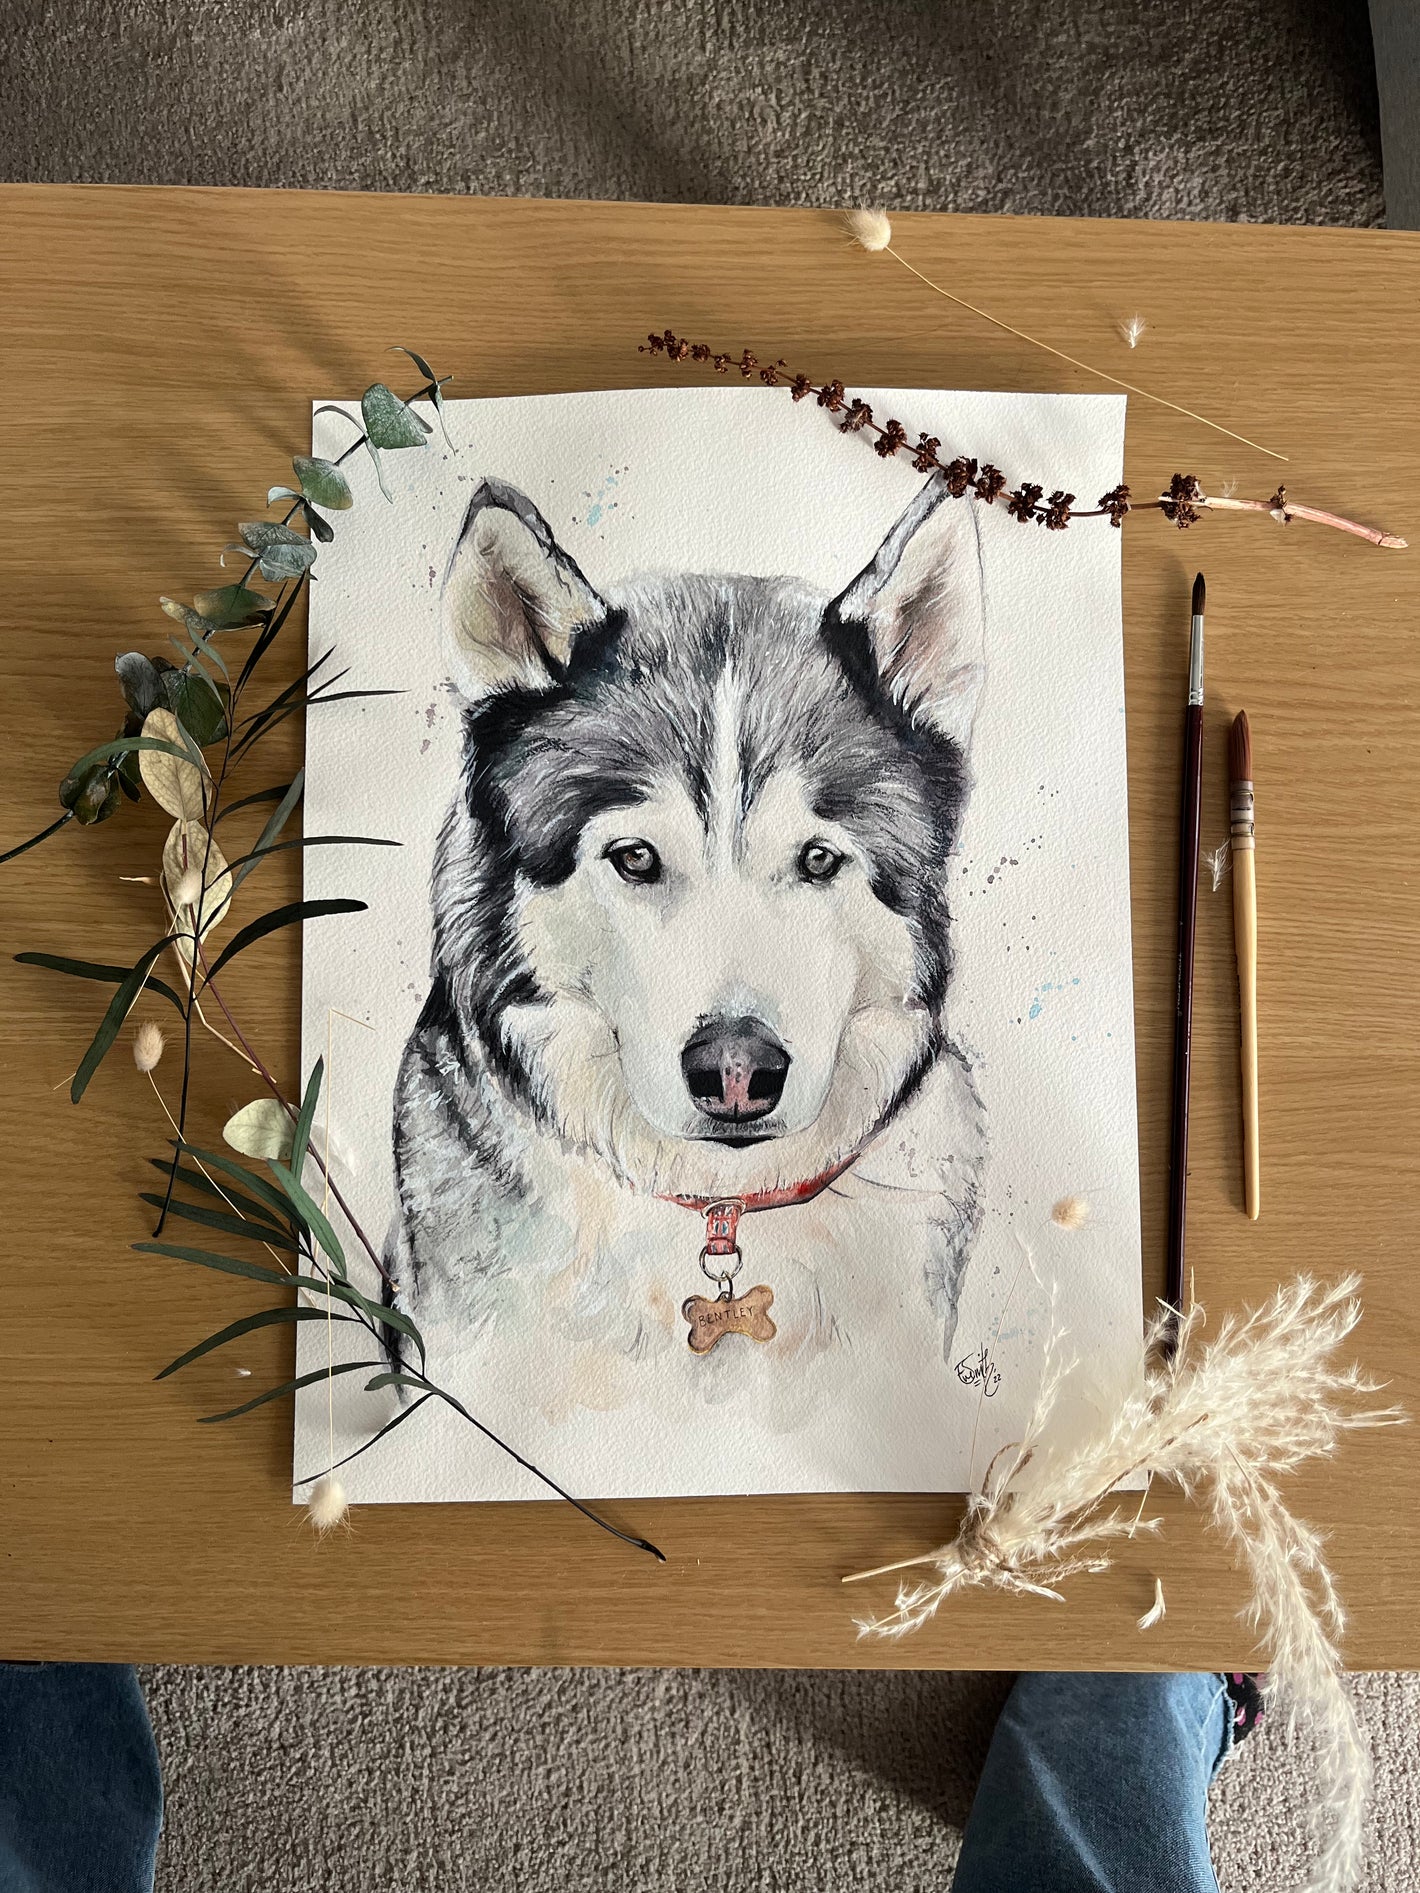 A watercolour pet portrait of a husky gazing straight ahead. Captured by local Grimsby artist, Eve Leoni Smith.